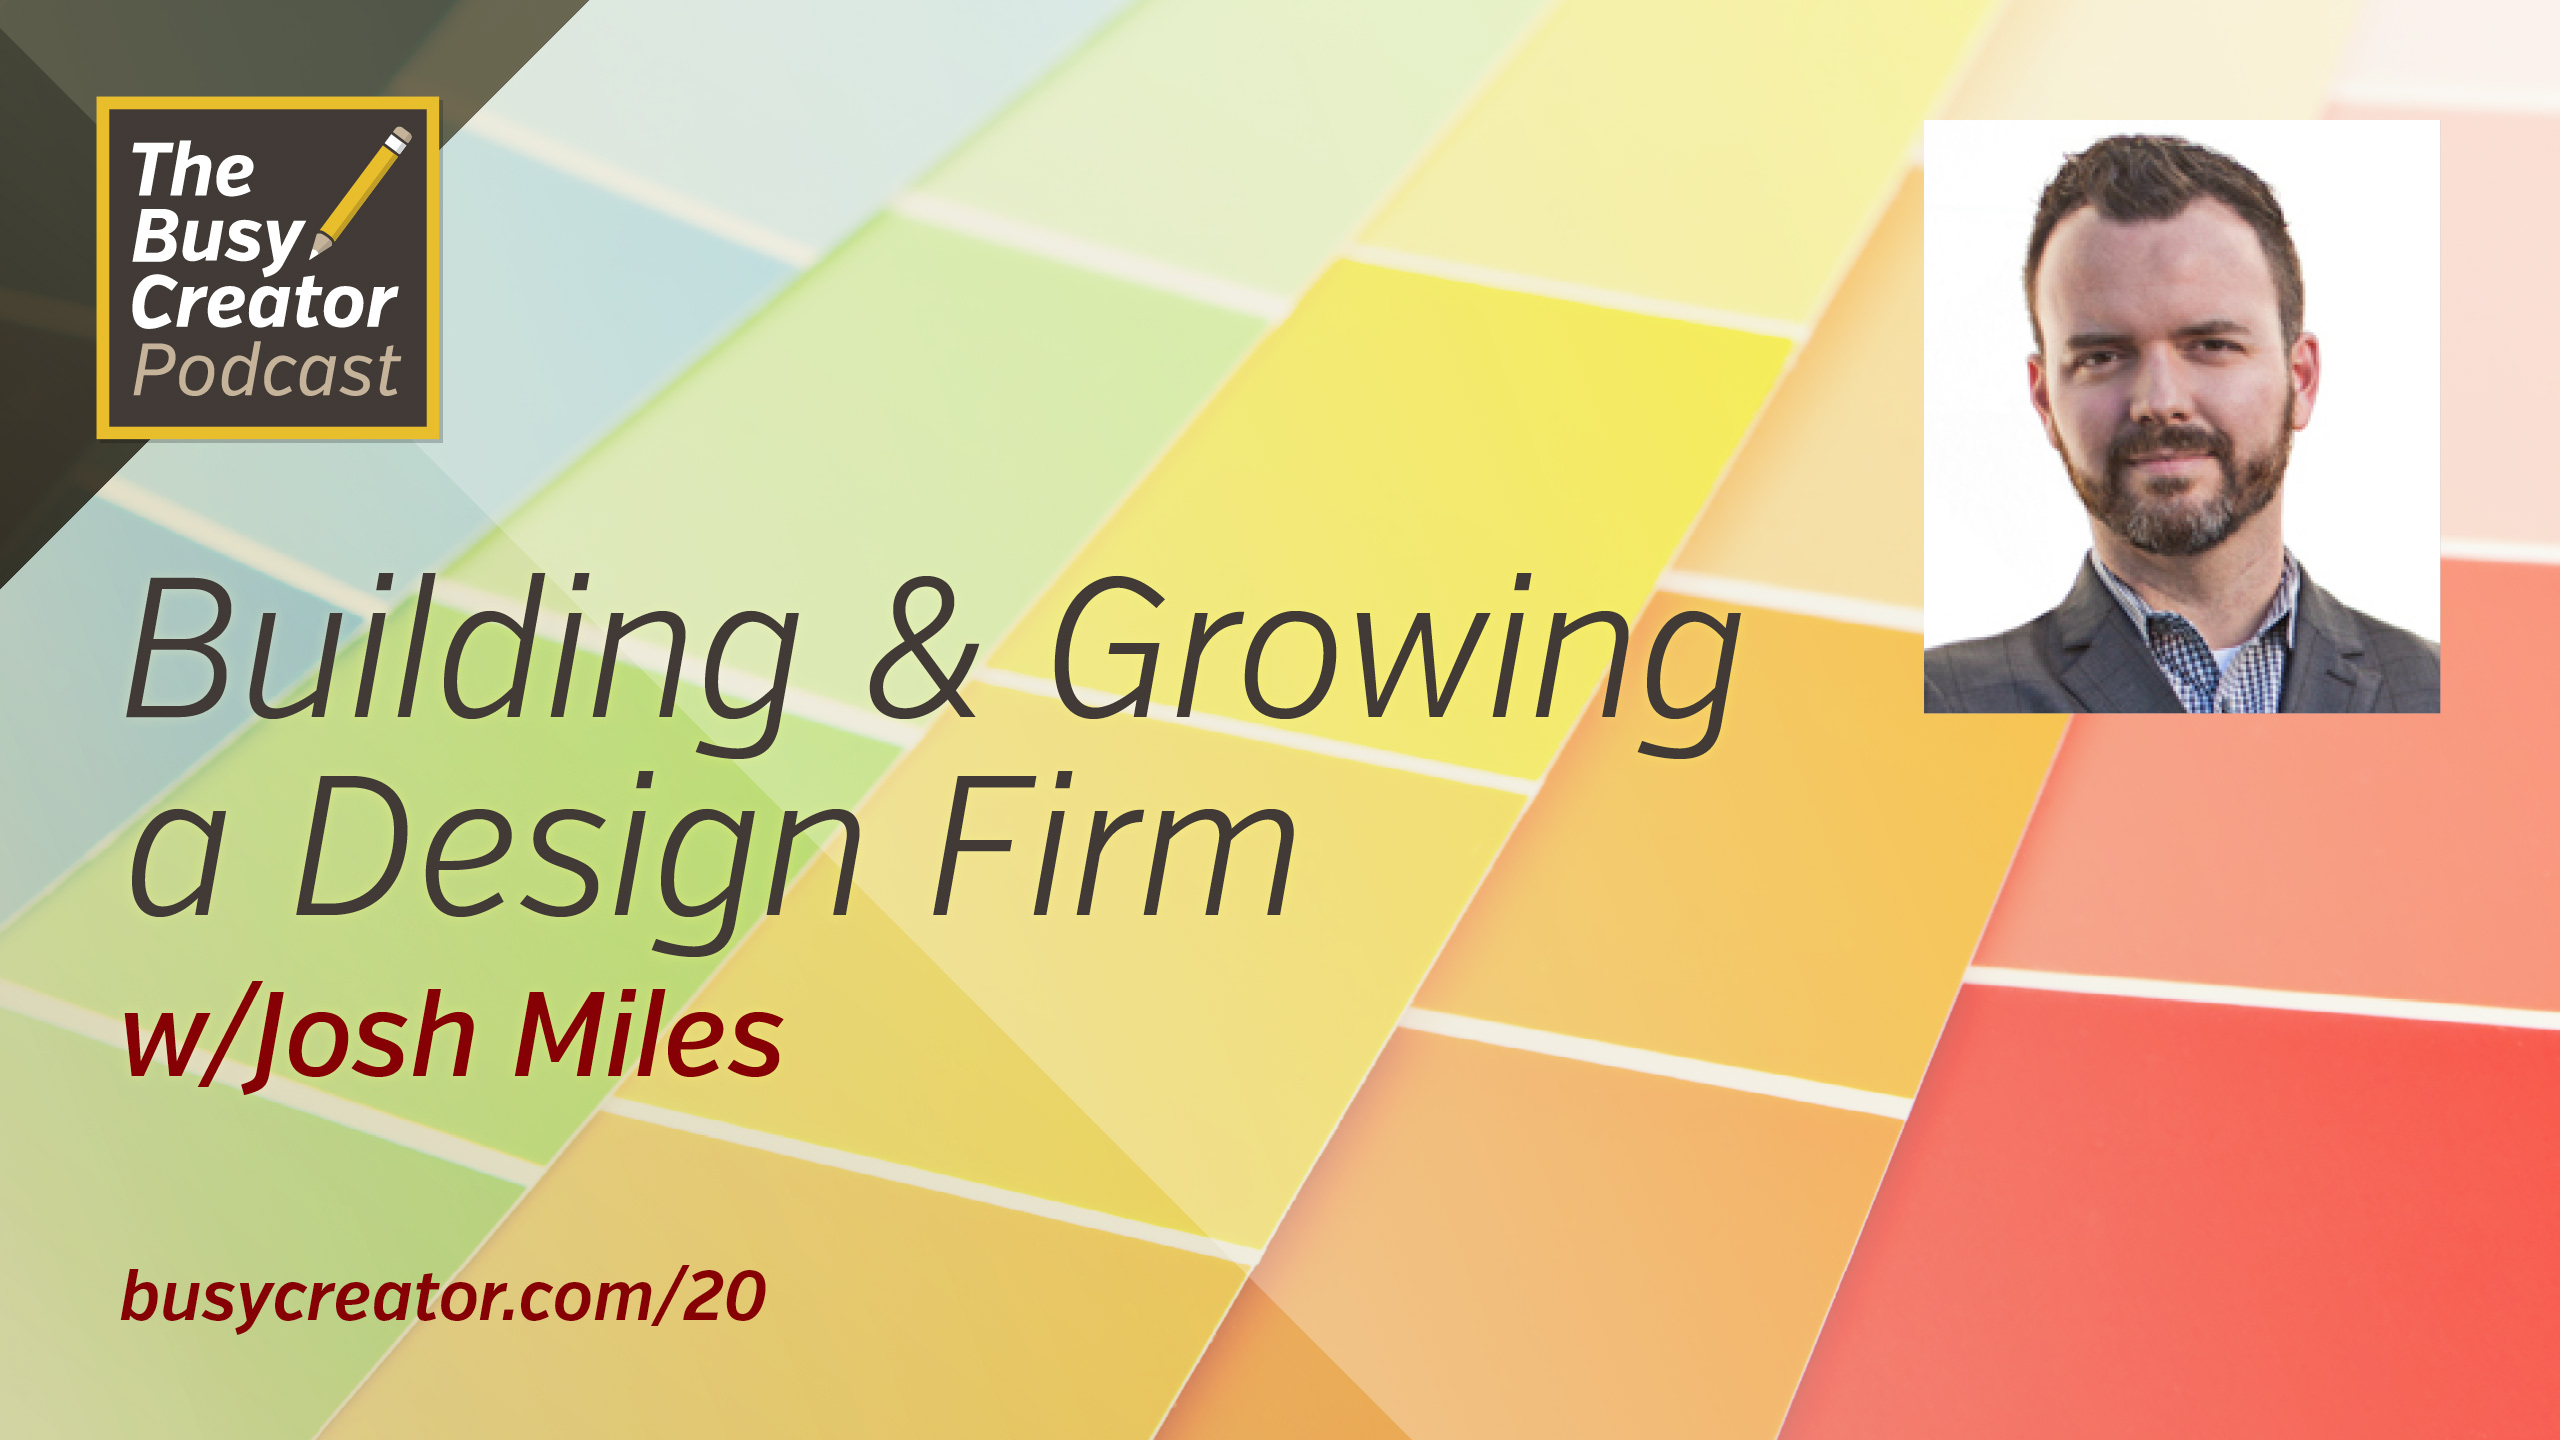 Building and Growing a Small Design Firm, with Josh Miles